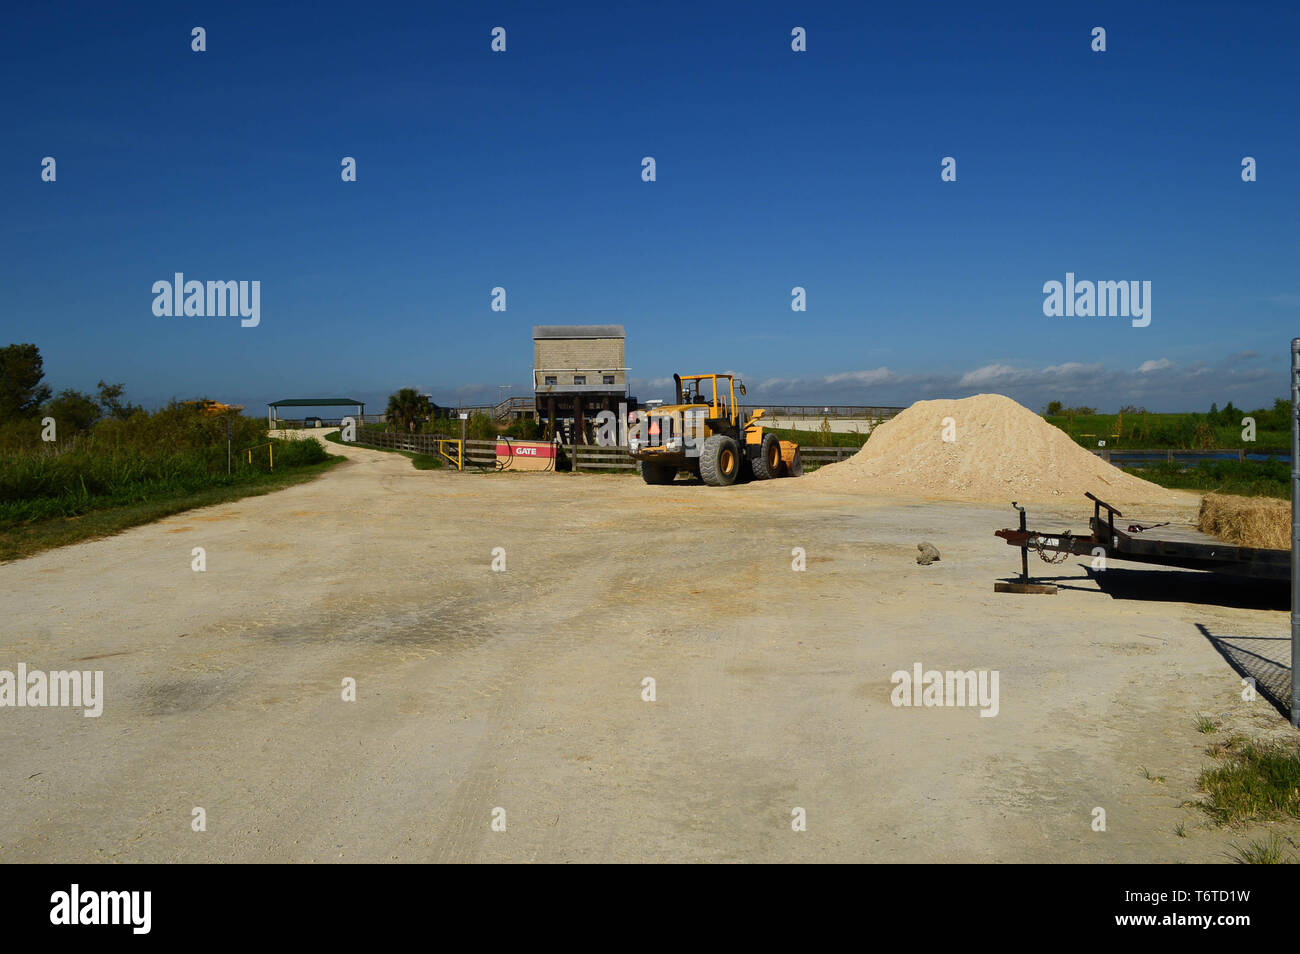 Heavy Machinery Road Construction on Lime Rock Earthen Florida Dirt Road Remote Industrial Area Diesel Fuel Pump Station Commercial Development Photo Stock Photo